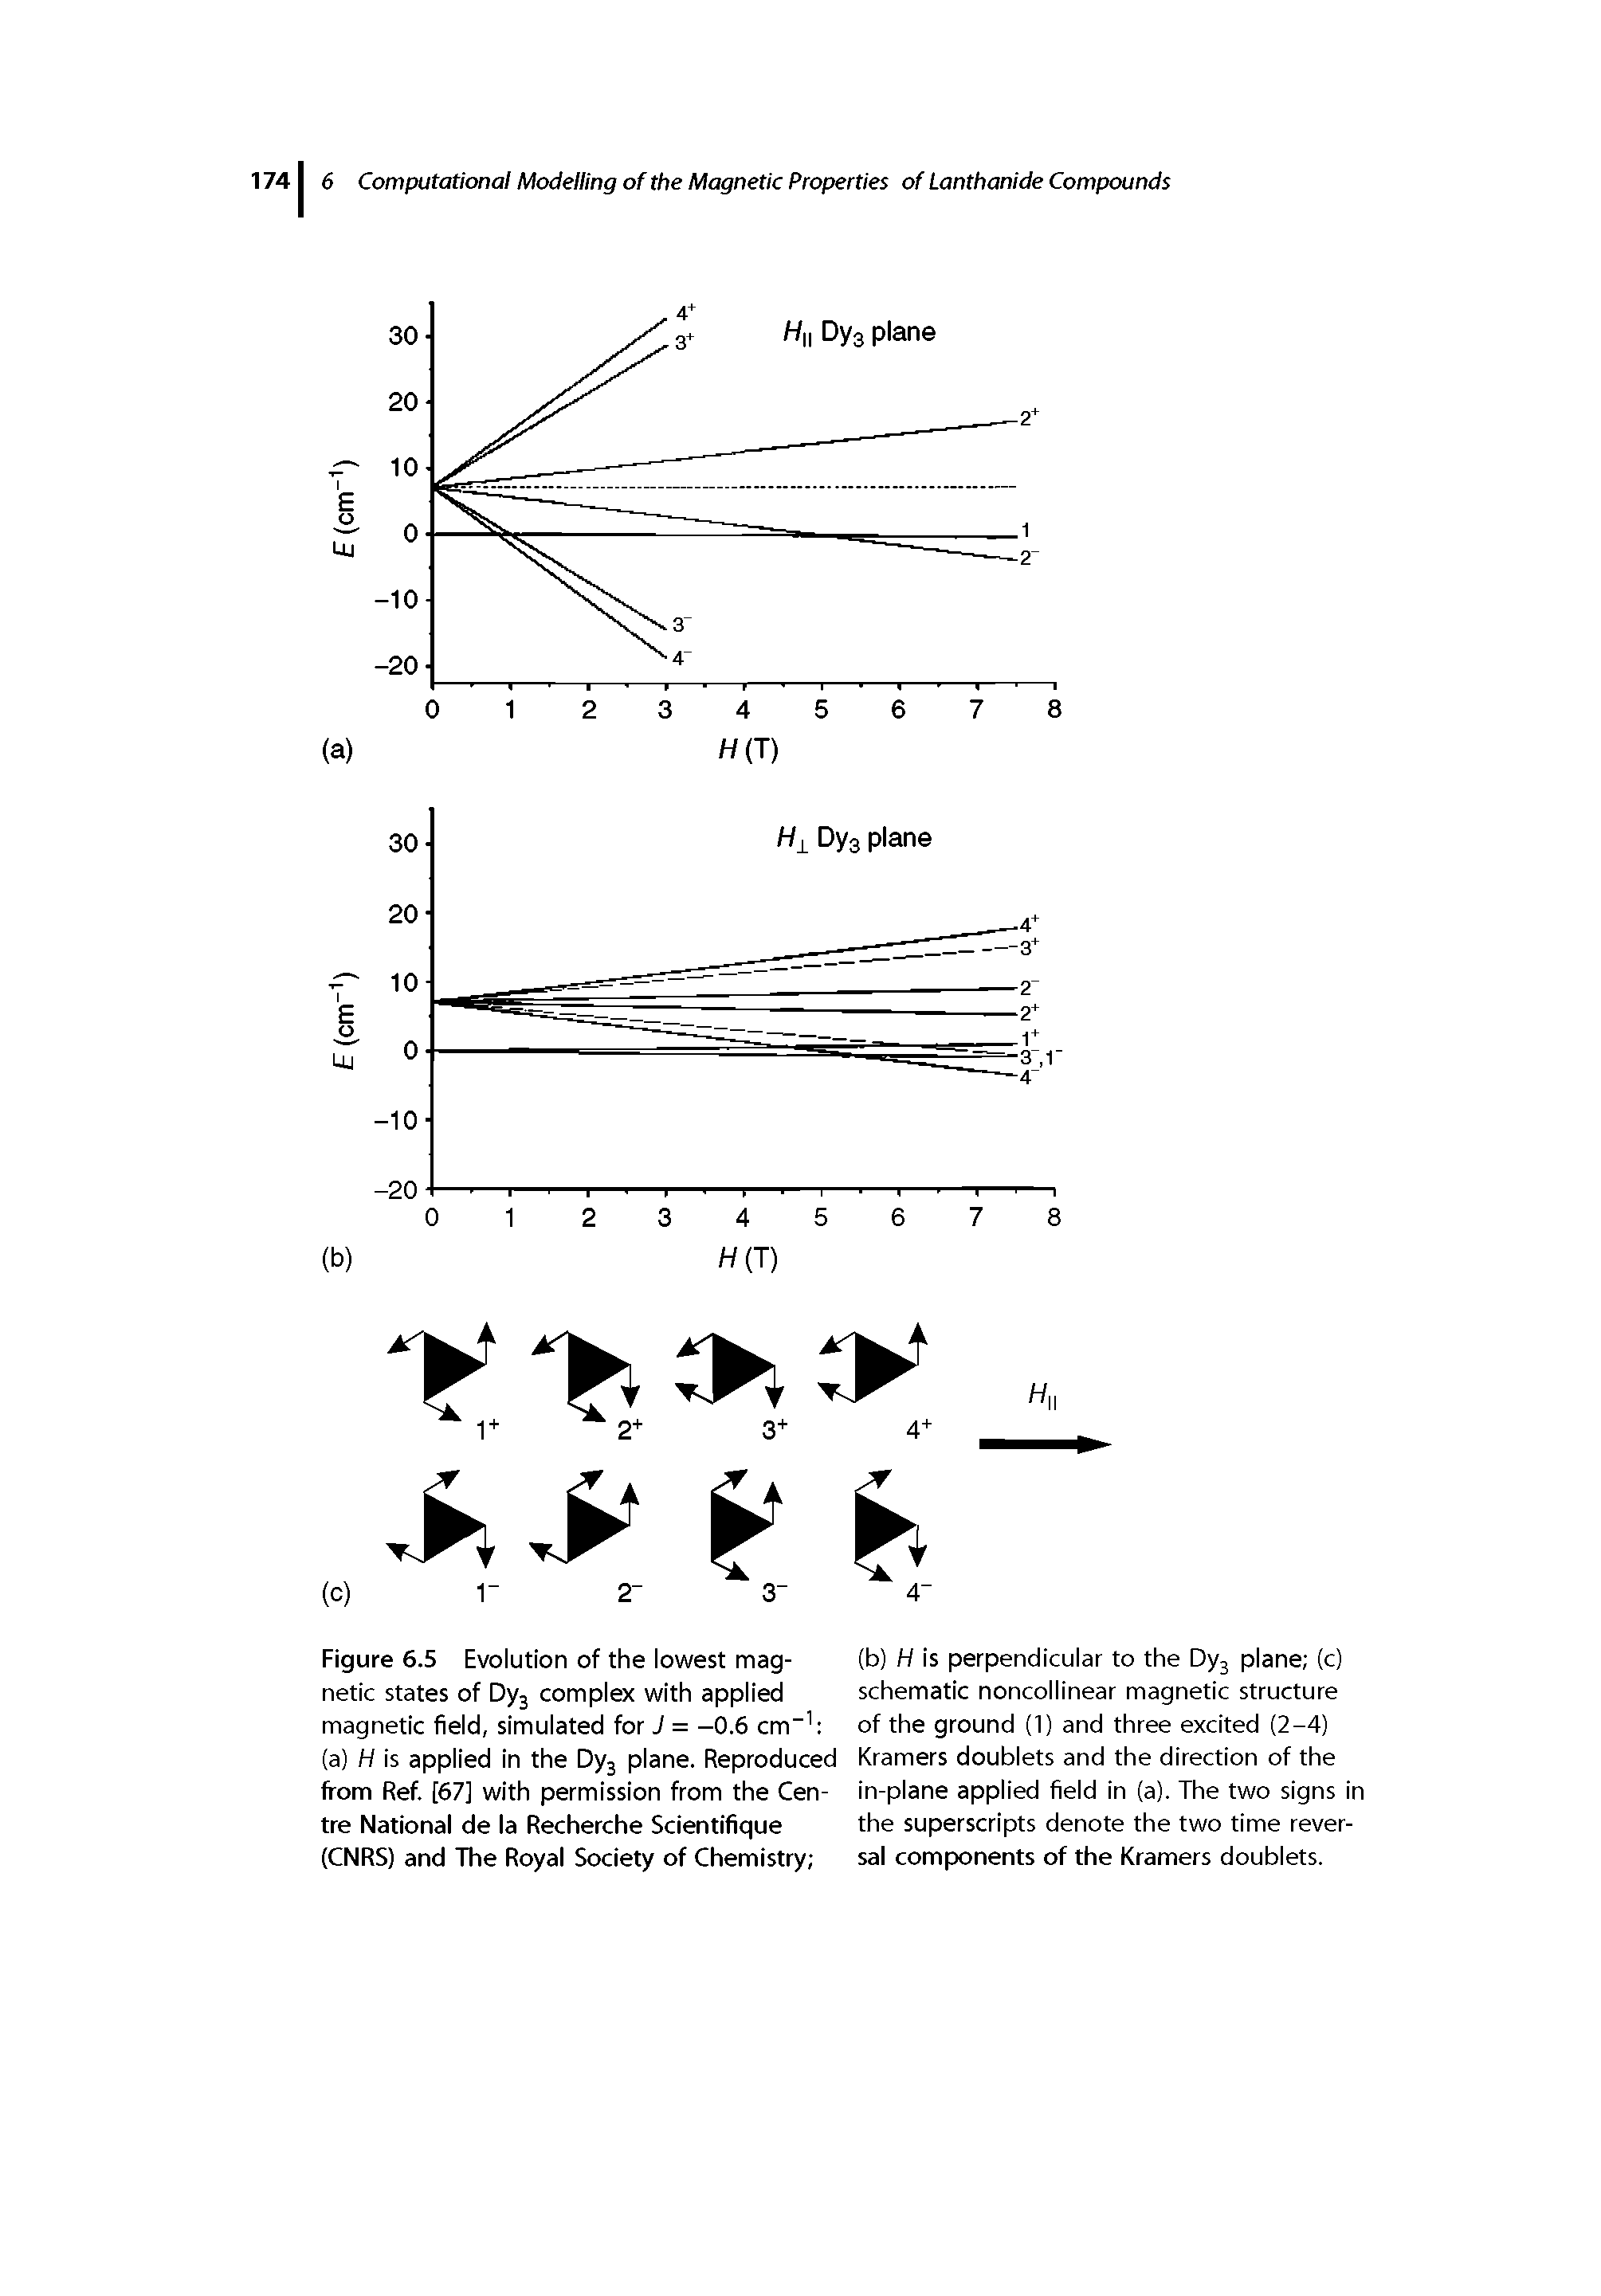 Figure 6.5 Evolution of the lowest magnetic states of Dy3 complex with applied magnetic field, simulated for J = -0.6 cm-1 (a) H is applied in the Dy3 plane. Reproduced from Ref. [67] with permission from the Centre National de la Recherche Scientifique (CNRS) and The Royal Society of Chemistry ...